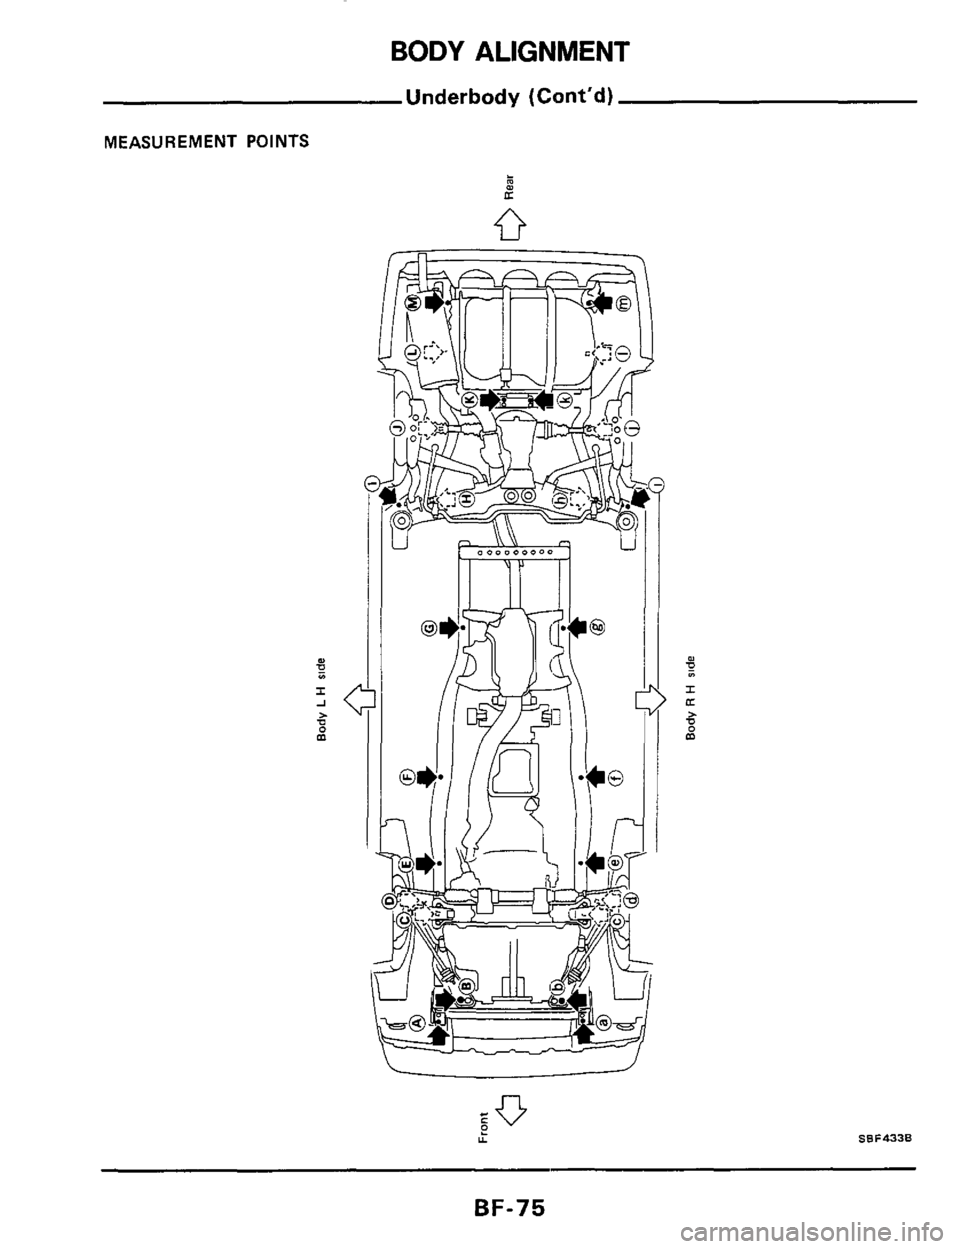 NISSAN 300ZX 1984 Z31 Body Manual PDF BODY ALIGNMENT 
Underbody (Cont’d) 
MEASUREMENT  POINTS 
& e 
Y 
BF-75  